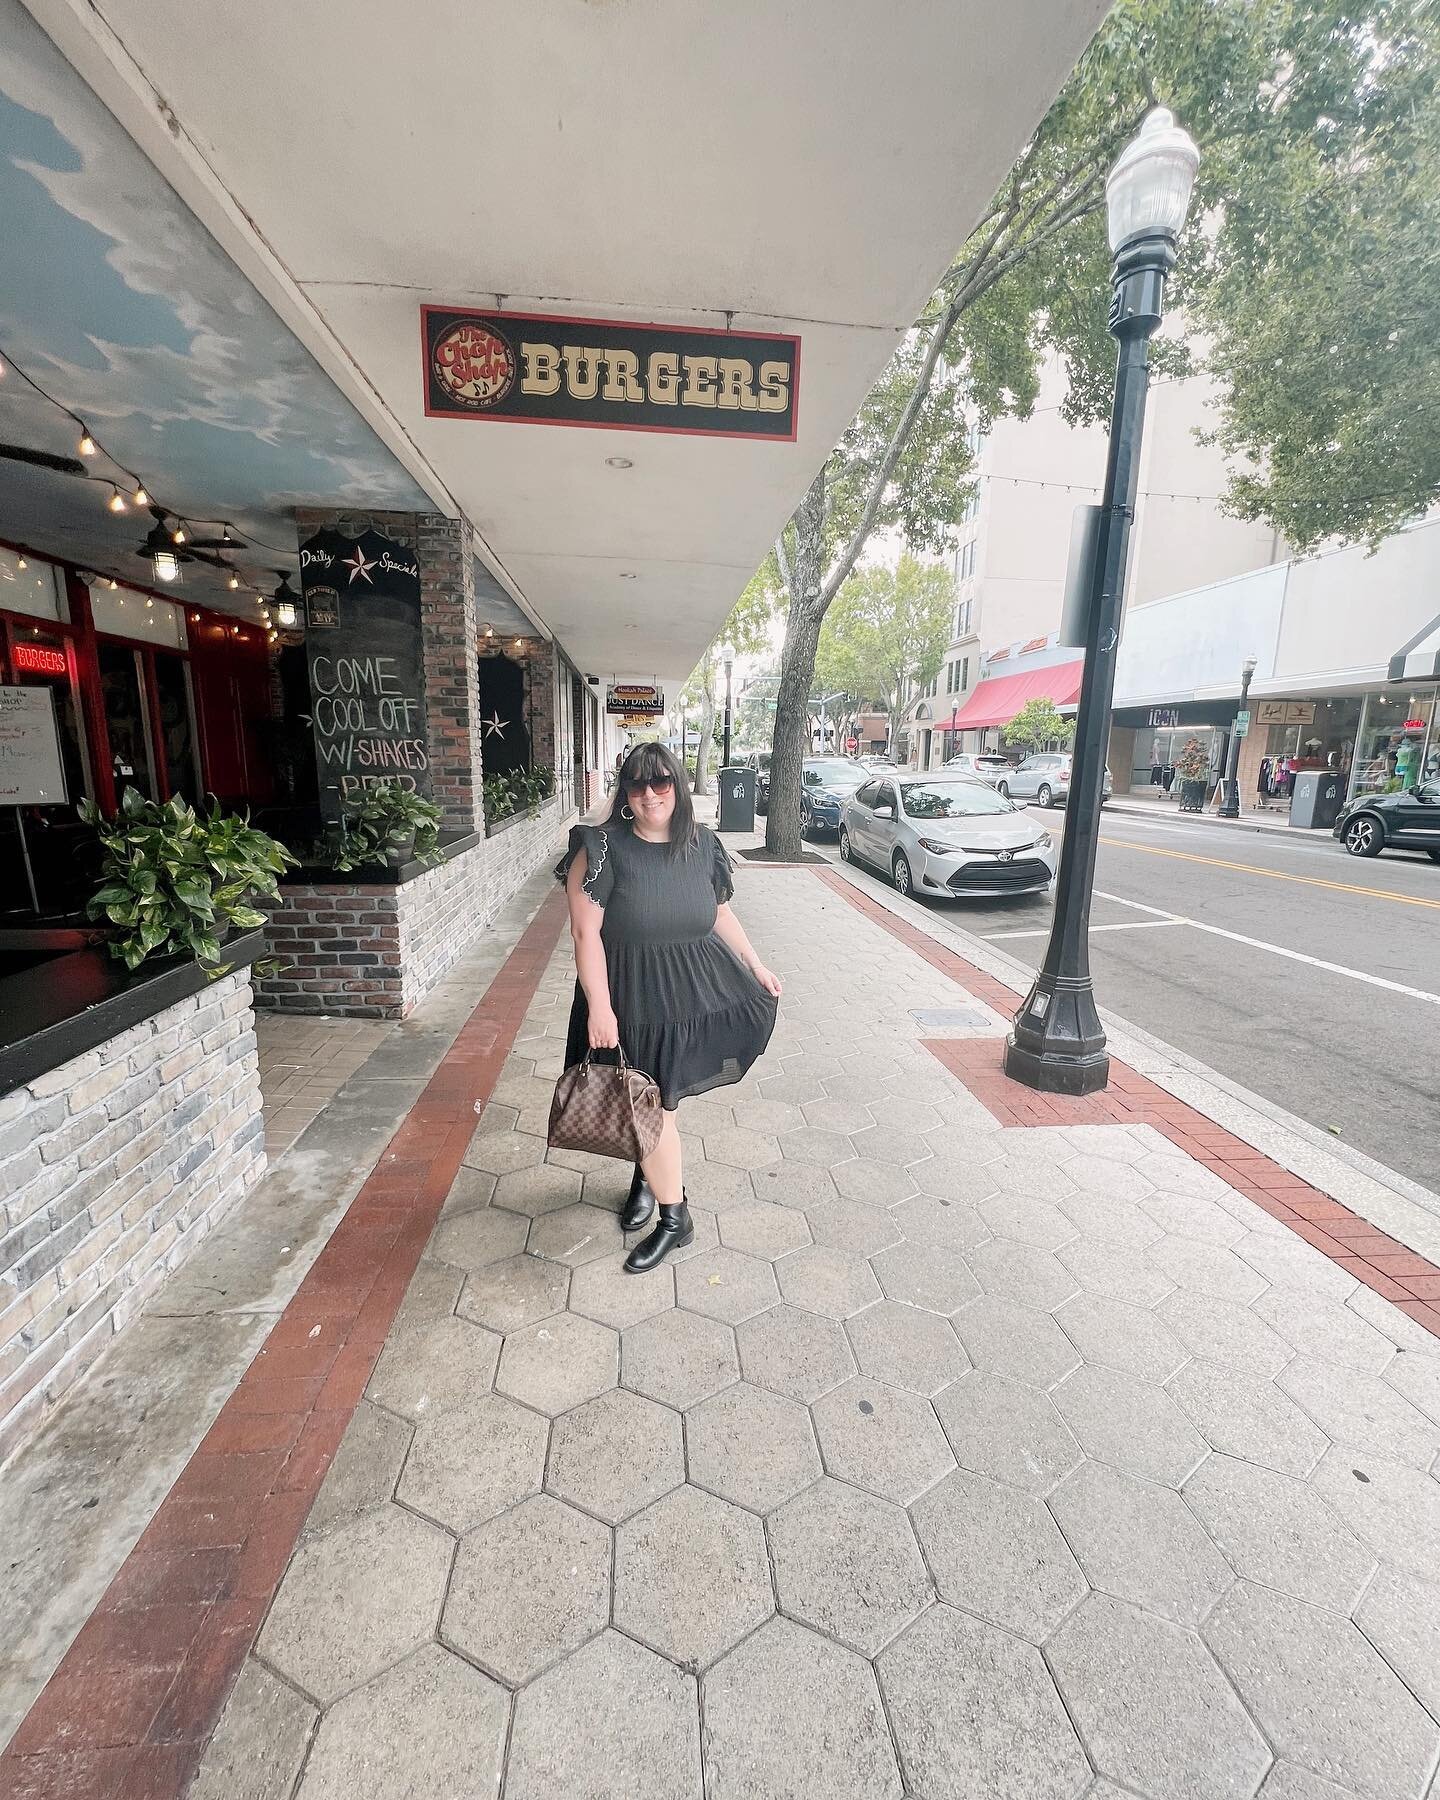 if someone could please tell the sleeve of my dress to do better, that would totally be great. 

 but honestly, gotta love days in downtown Lakeland &amp; sweet lunch meetings with great food and good vibes. 

also while we&rsquo;re at it, please tel